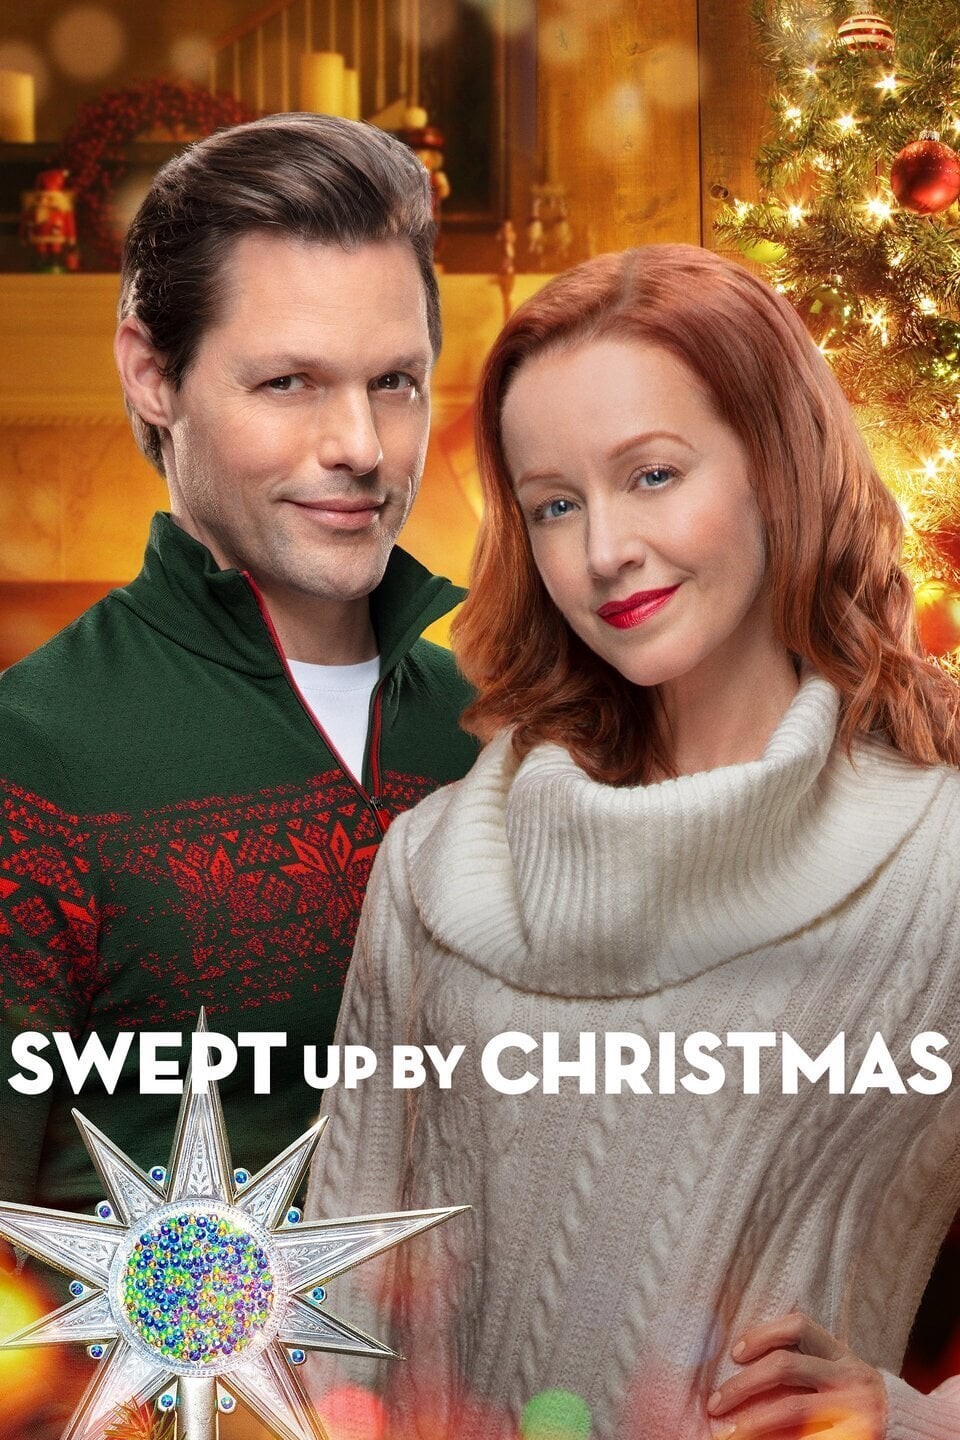 "Swept Up By Christmas" dvd cover, featuring characters Gwen and Reed standing together before a festive backdrop